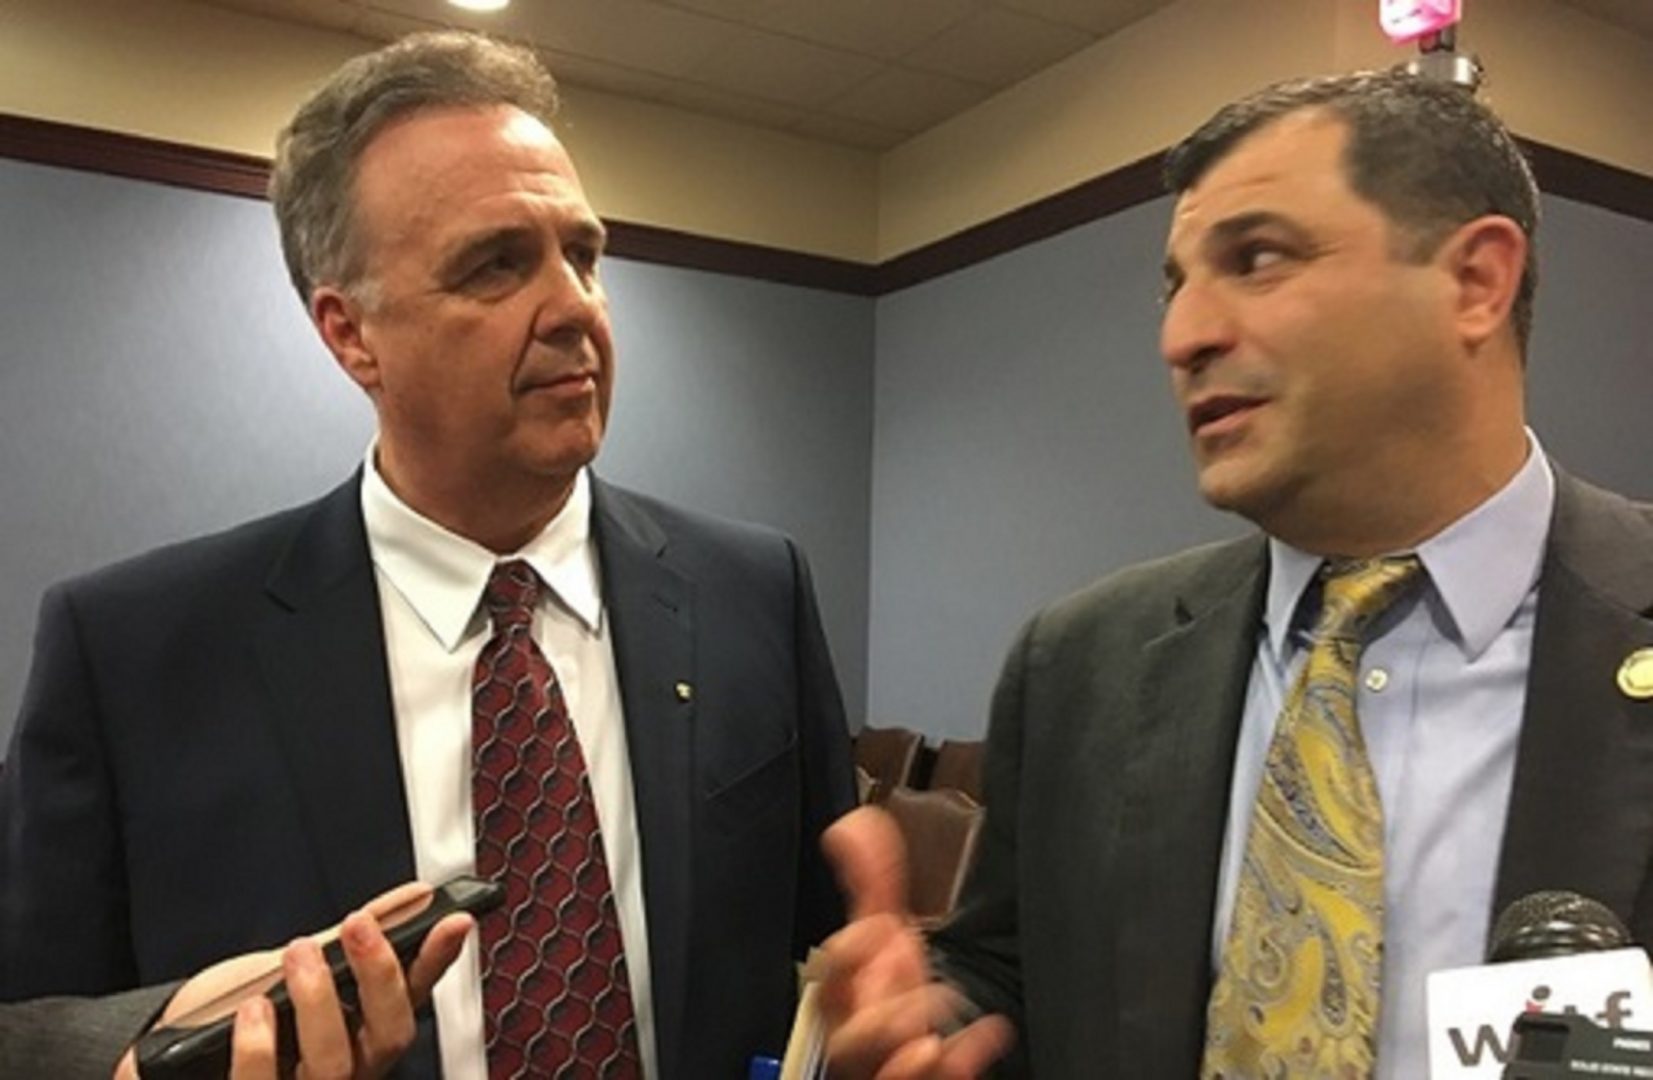 Representatives Jim Gregory and Mark Rozzi speak to reporters after the successful passage of their bills from the House Judiciary Committee. 